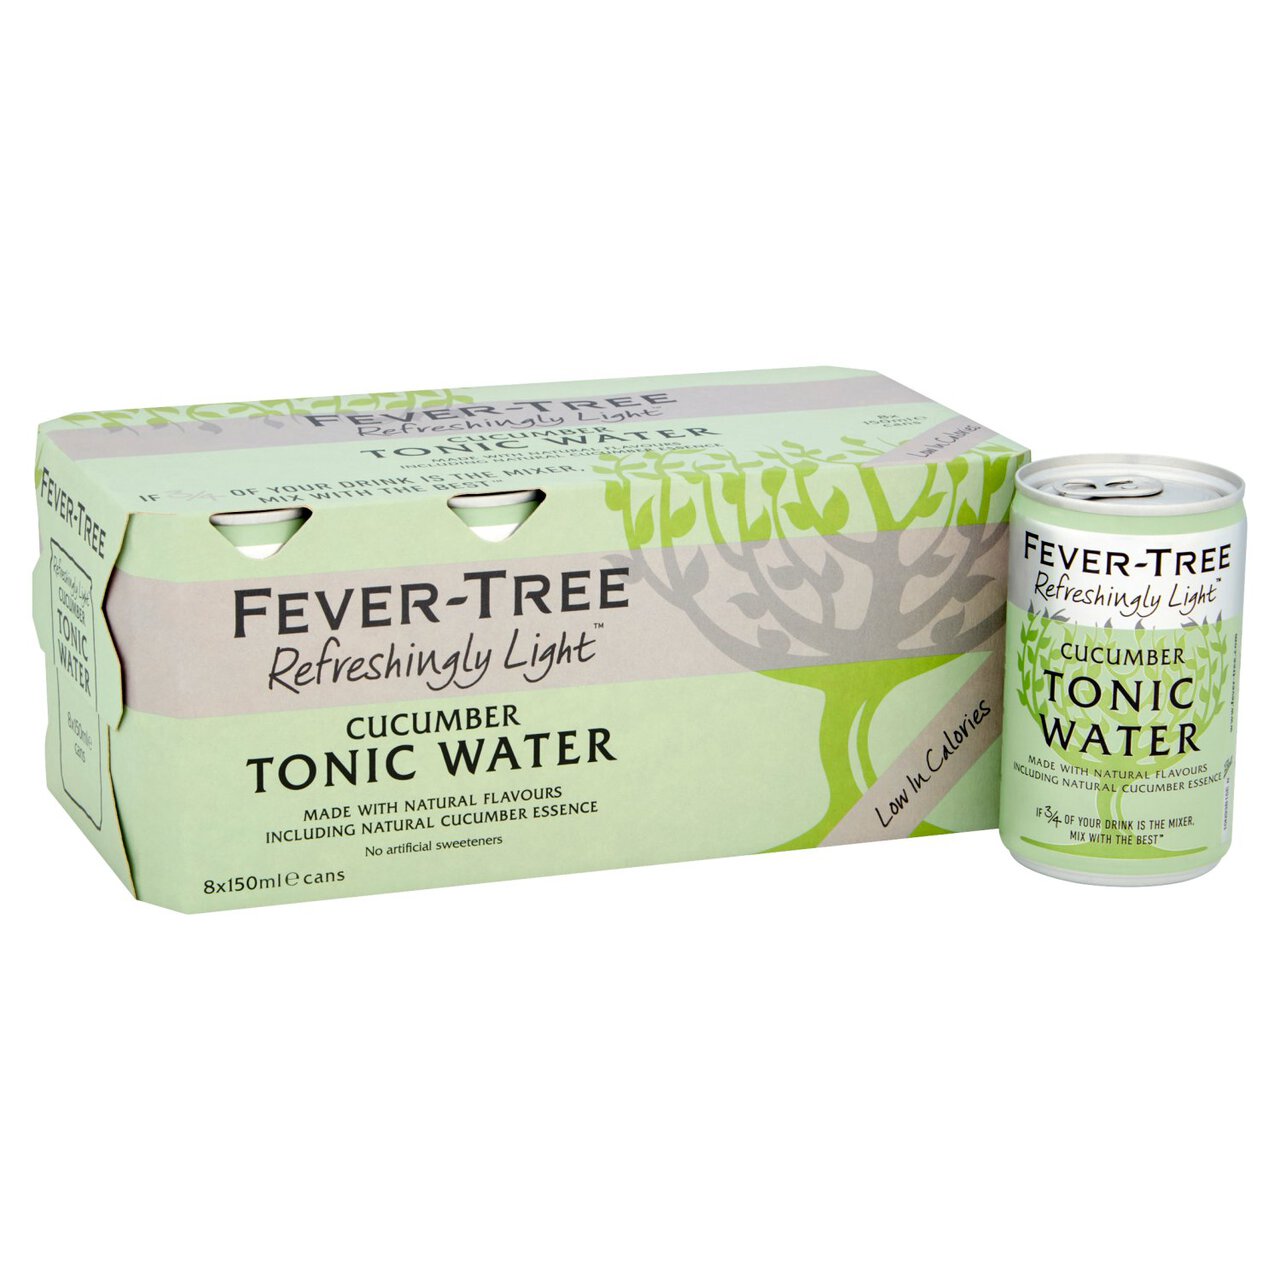 Fever-Tree Light Cucumber Tonic Cans 8 x 150ml